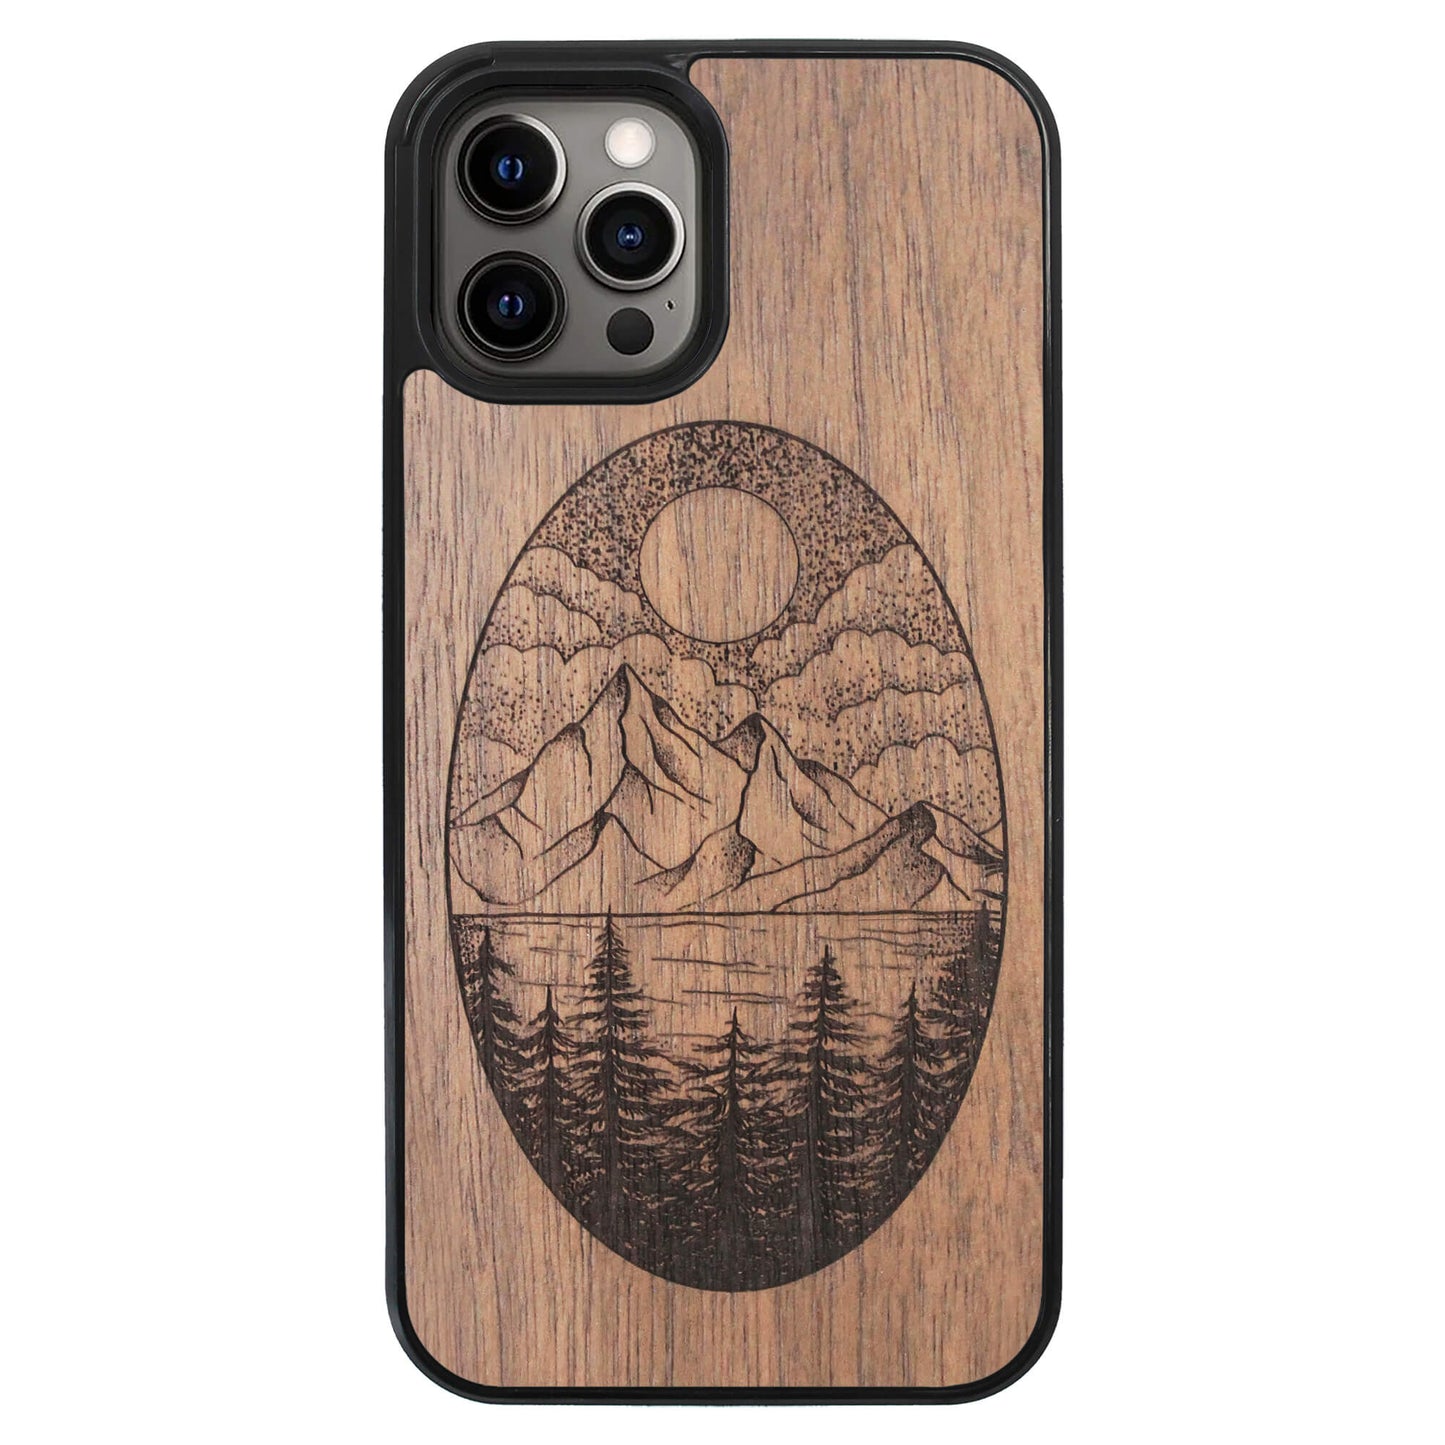 Wooden Case for iPhone 12 Pro Max Landscape